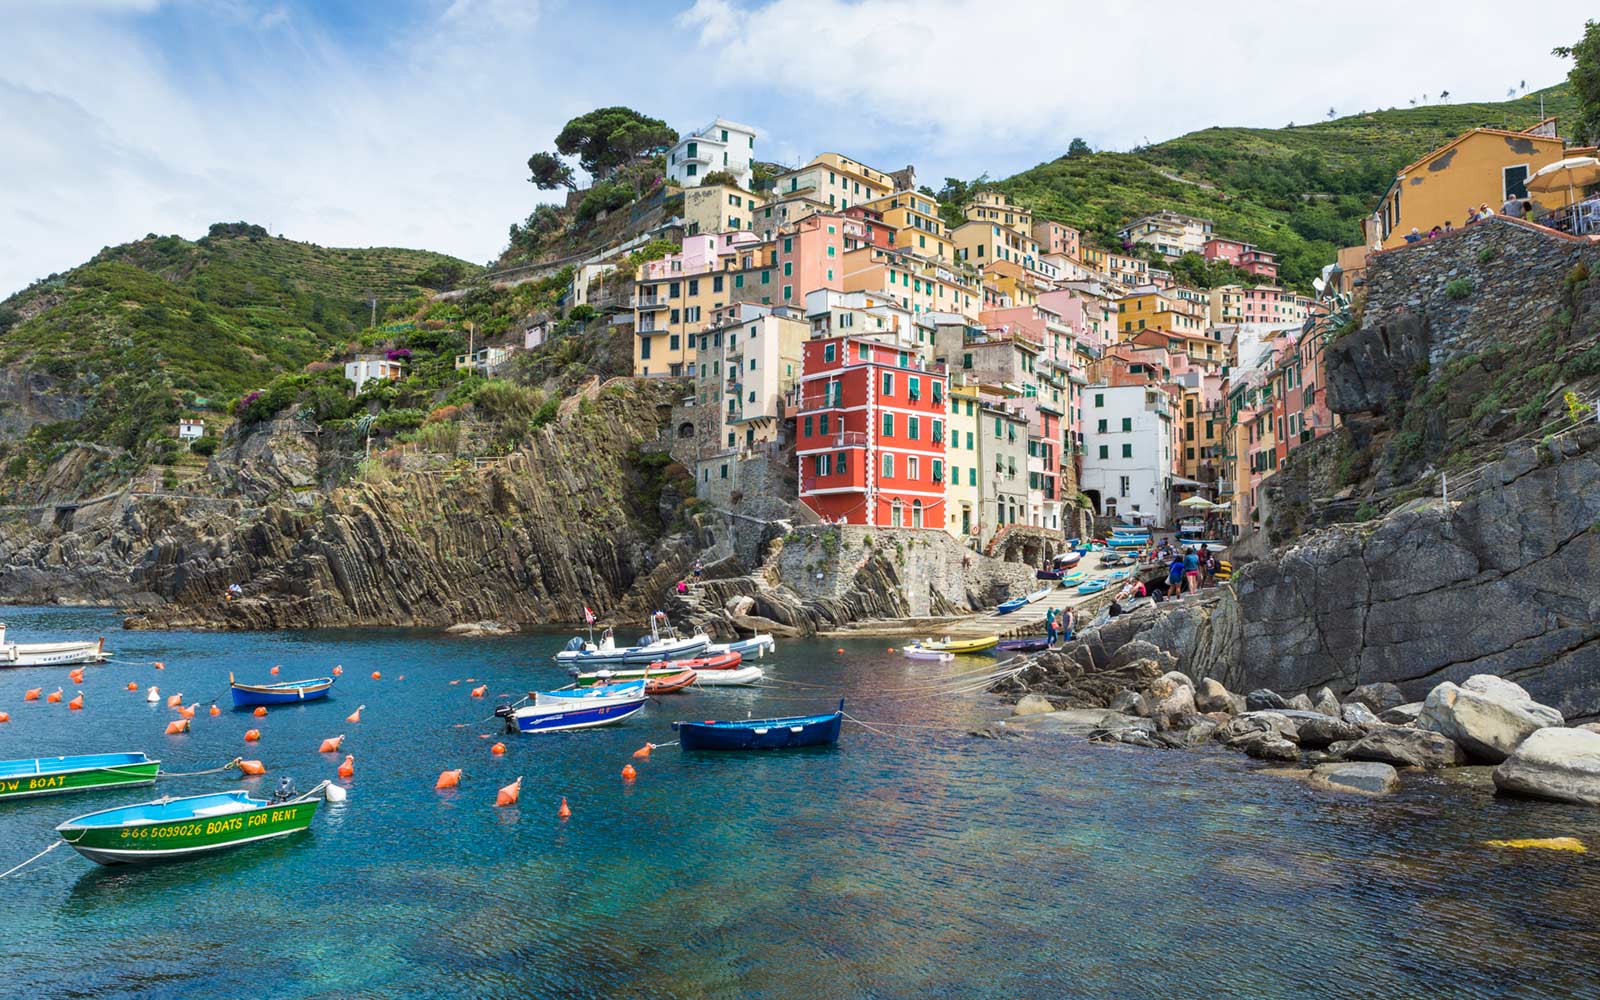 How to Travel to Cinque Terre. Travel + Leisure